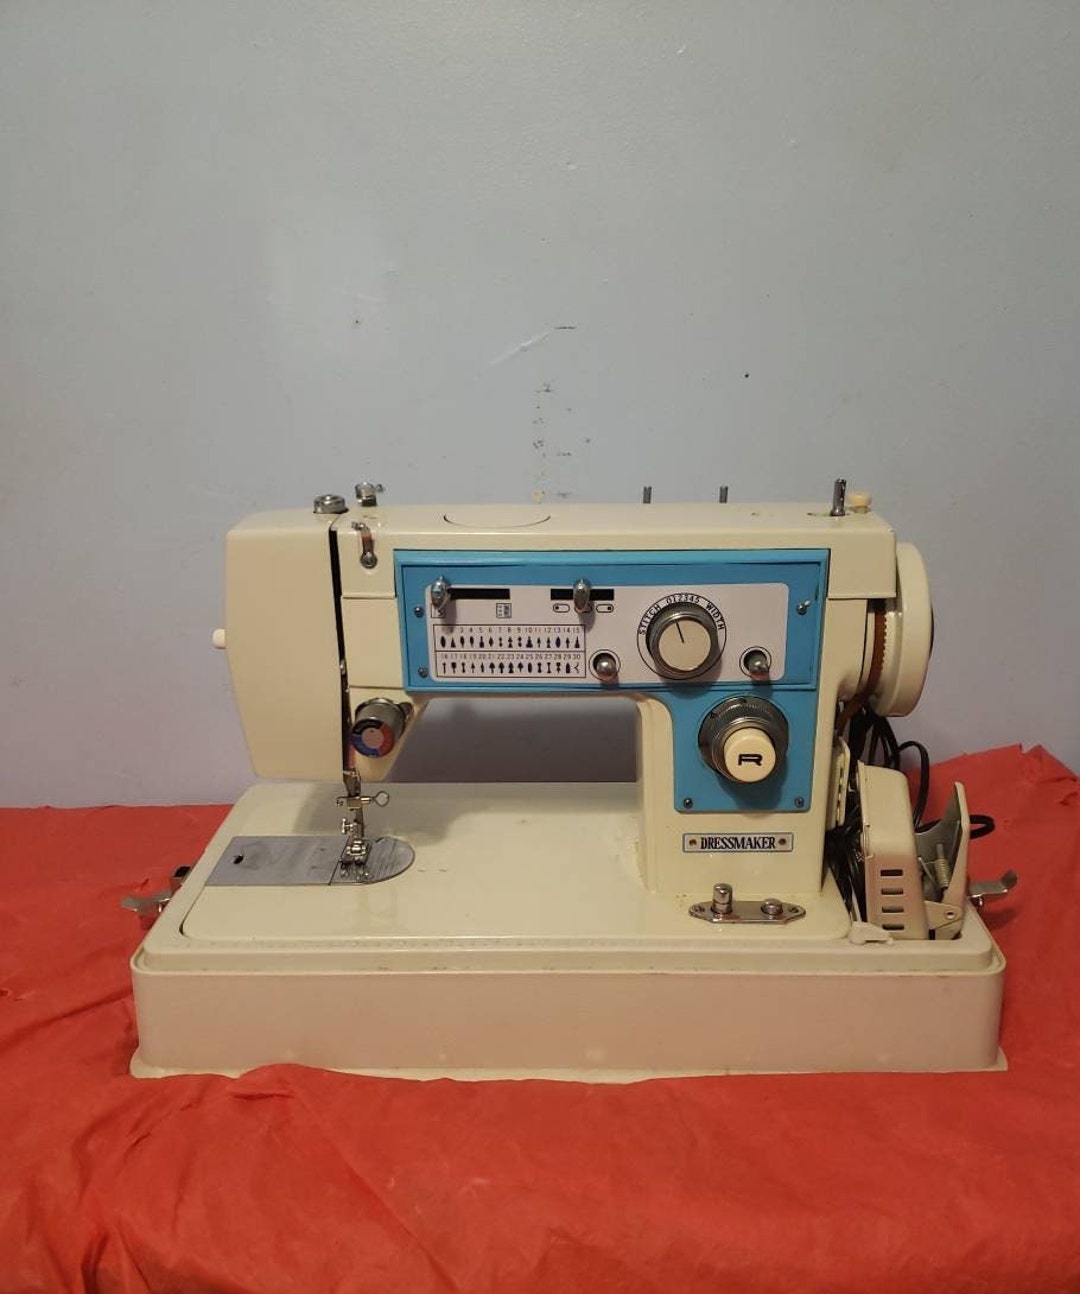 Sewing Machines – The Slipcover Maker